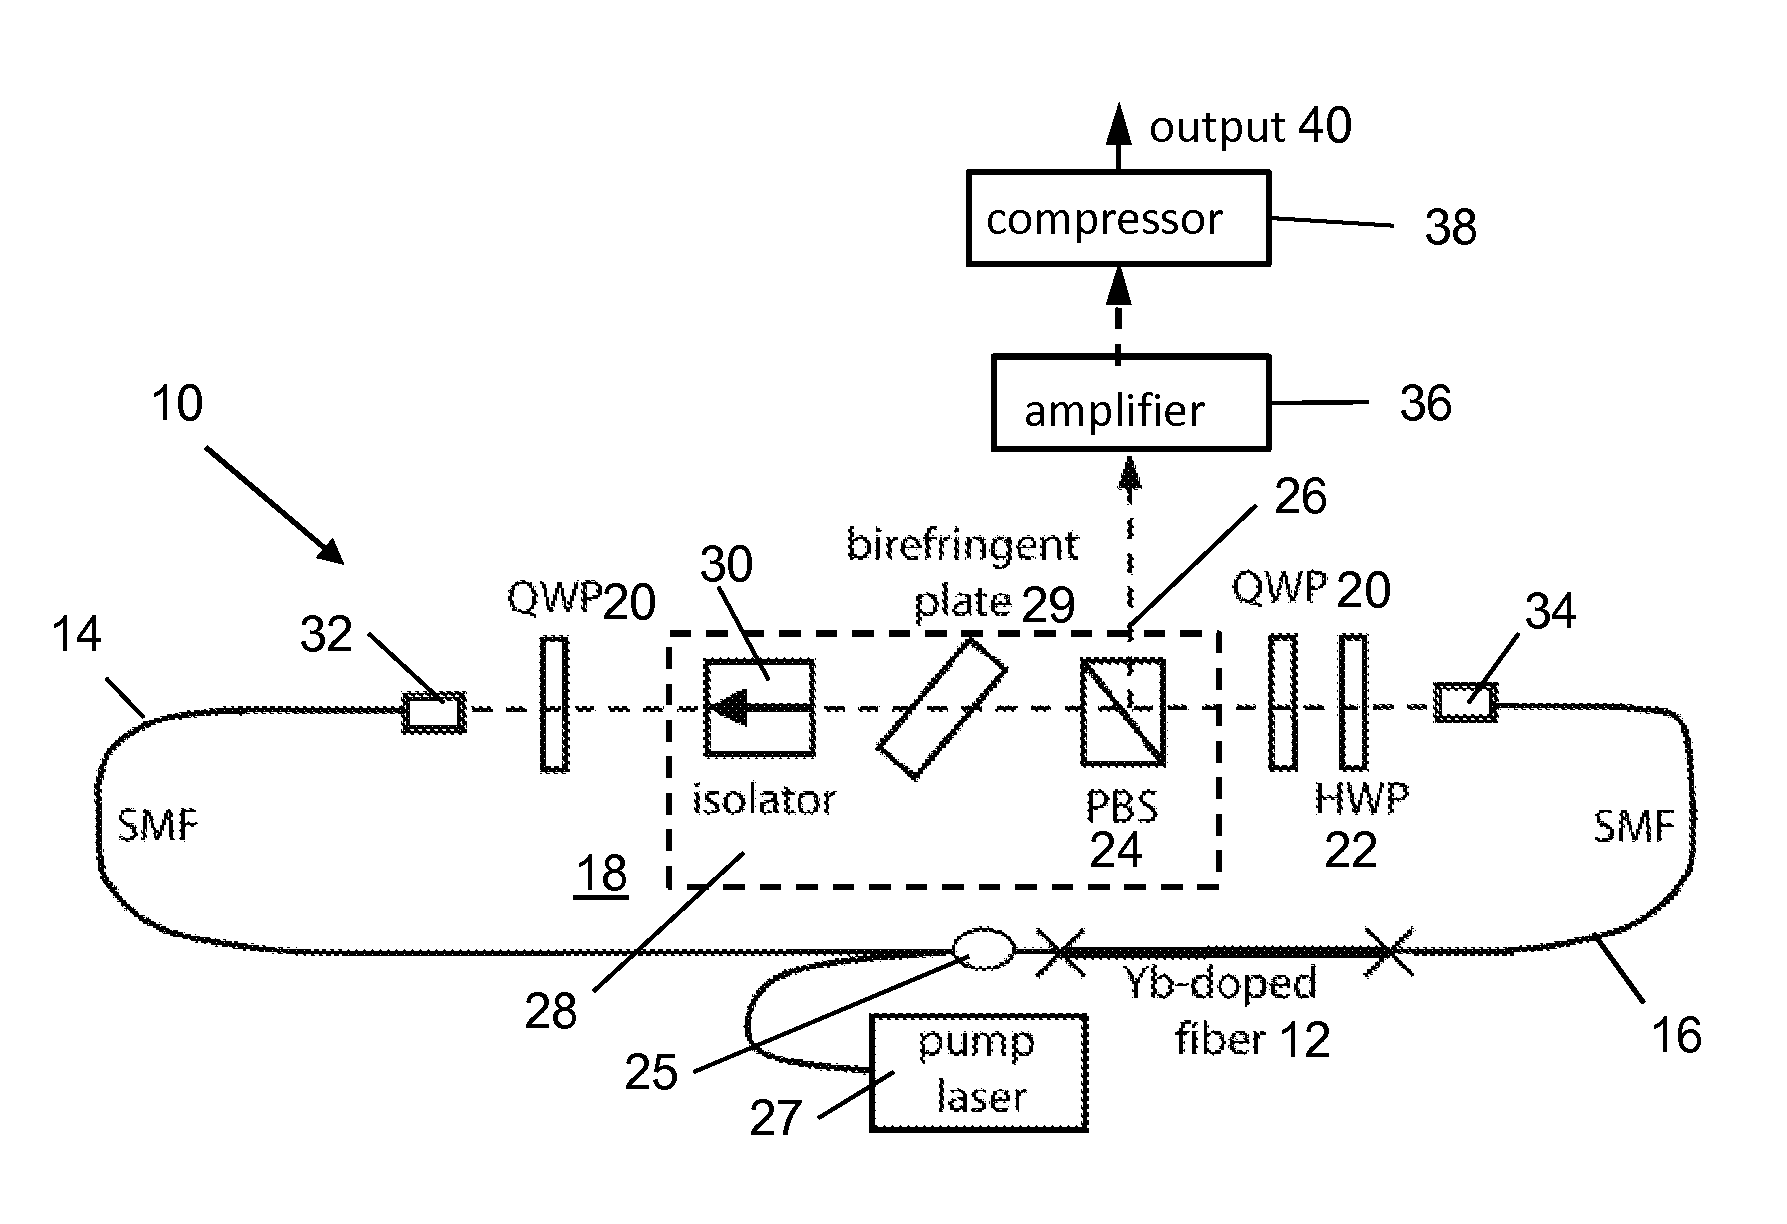 Giant-chirp oscillator for use in fiber pulse amplification system